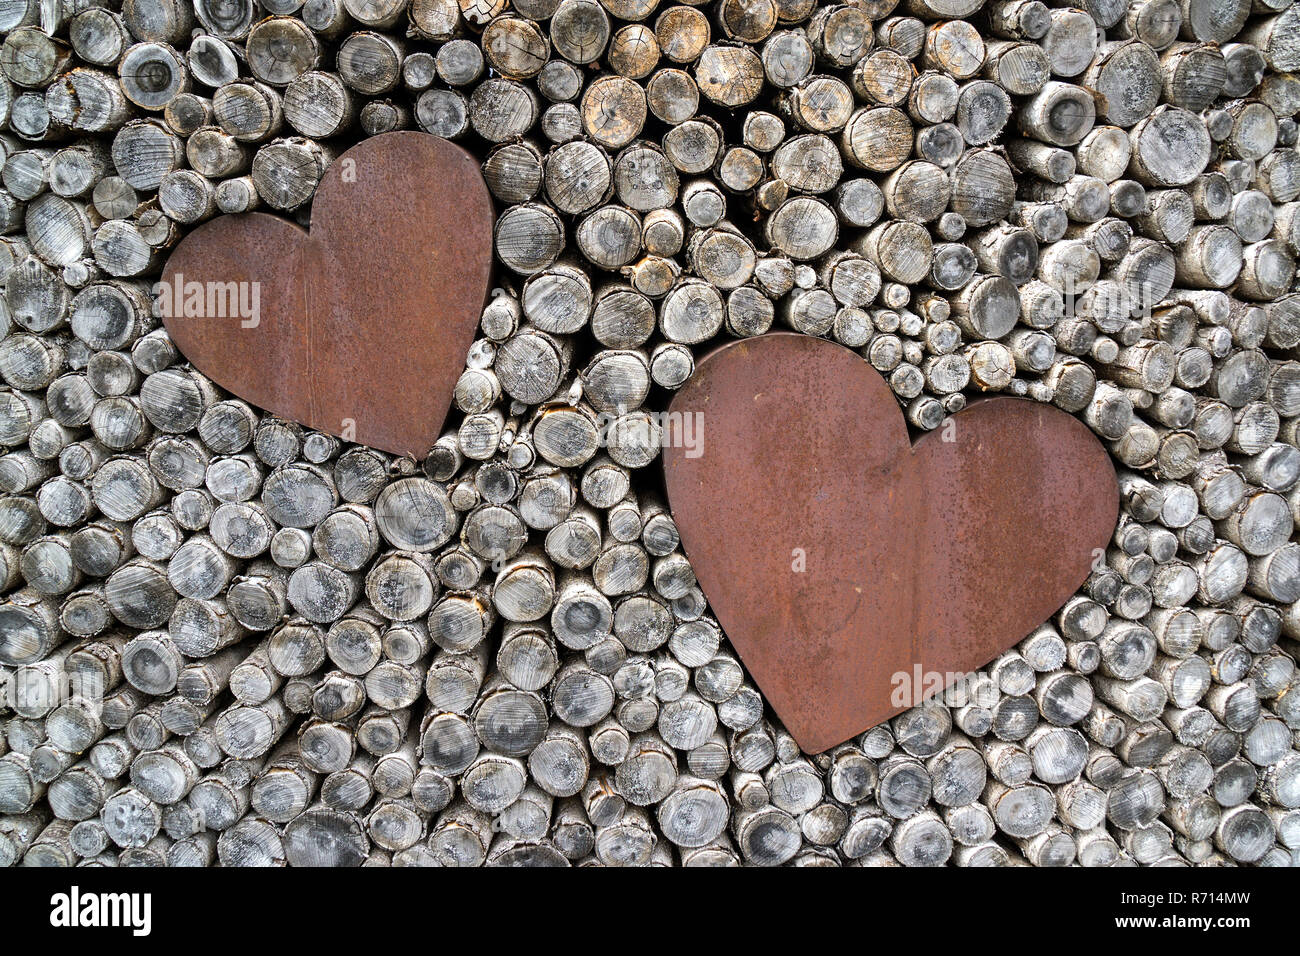 Hearts of metal in a stack of wood, Allgäu, Bavaria, Germany Stock Photo